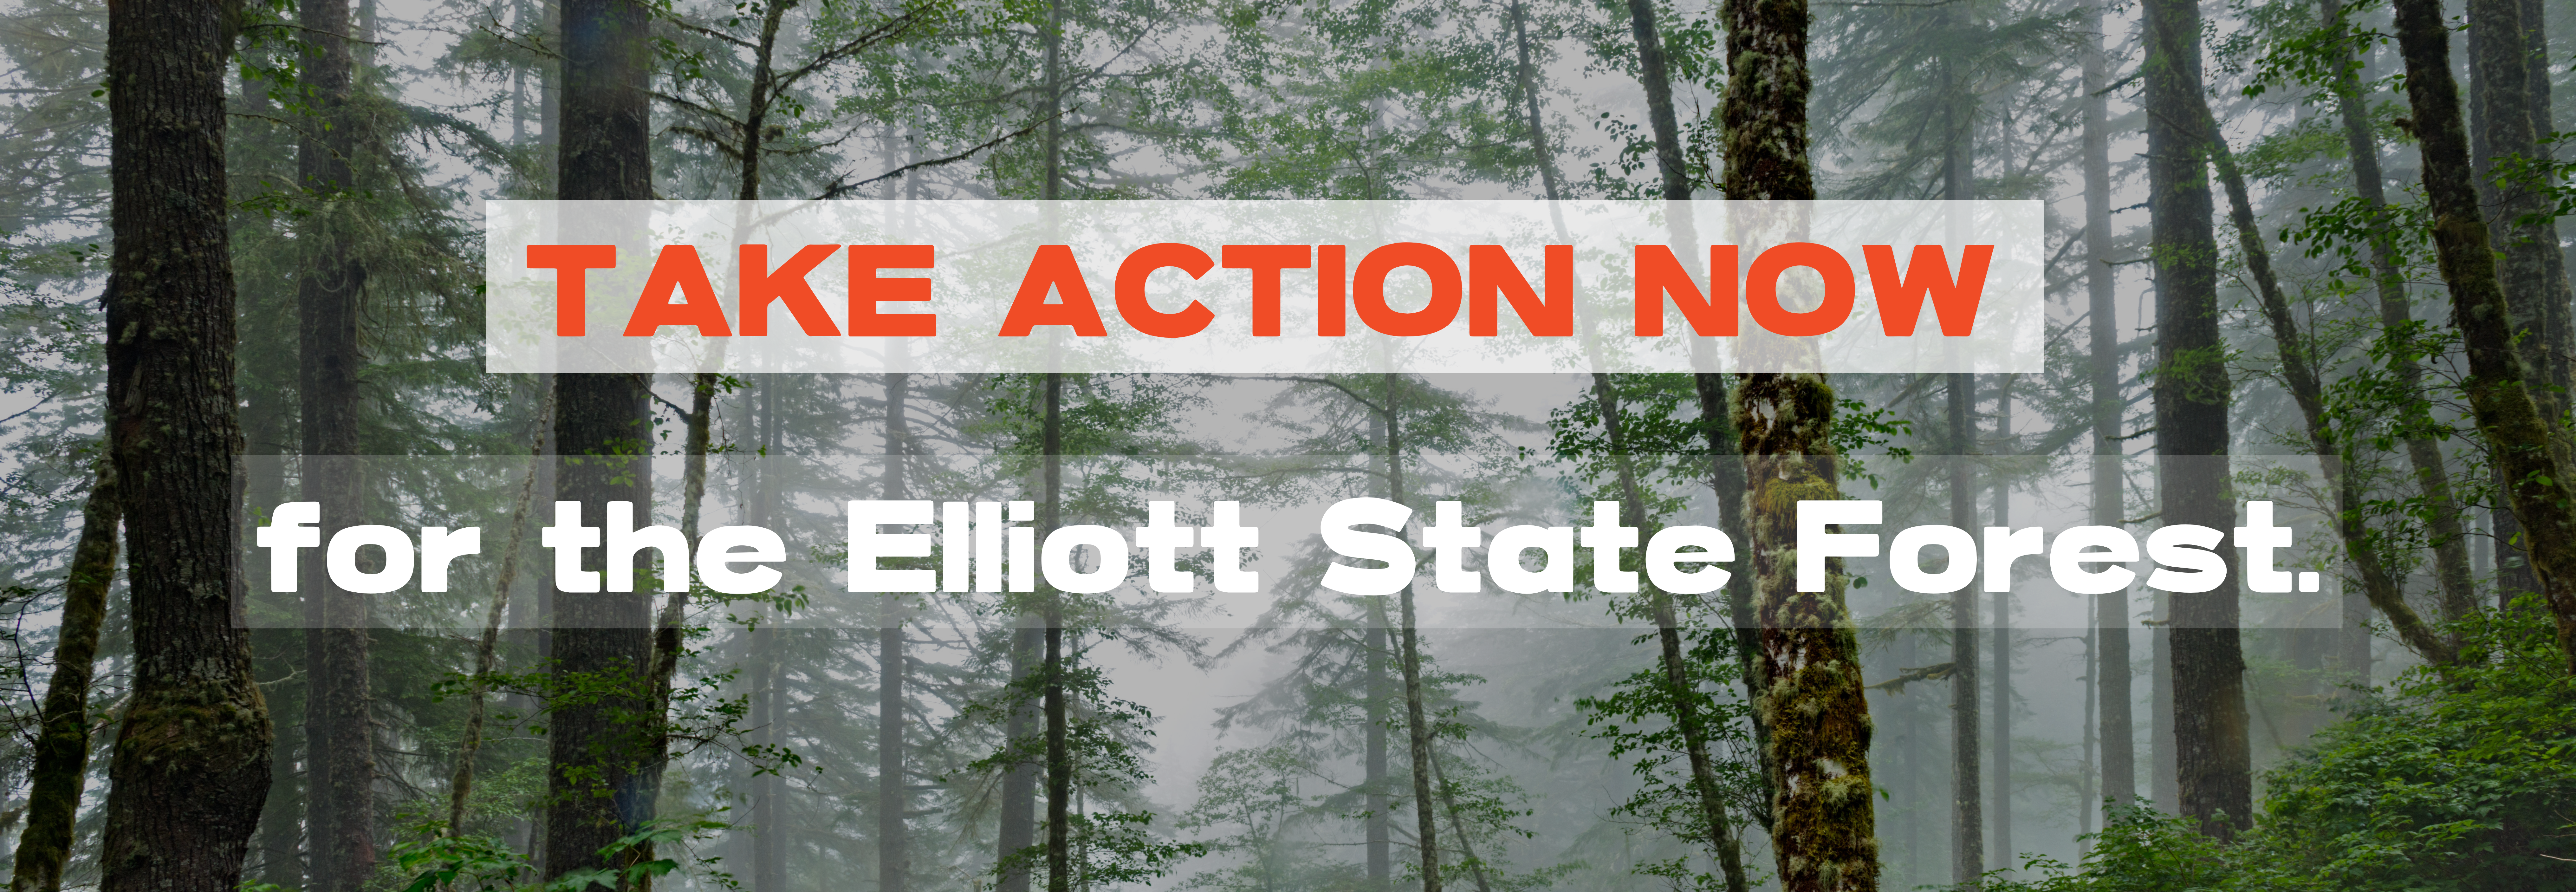 Copy of Copy of Copy of Copy of Copy of SLIDER_TAKE ACTION Future of PNW Forests (2600 x 900 px) (2)